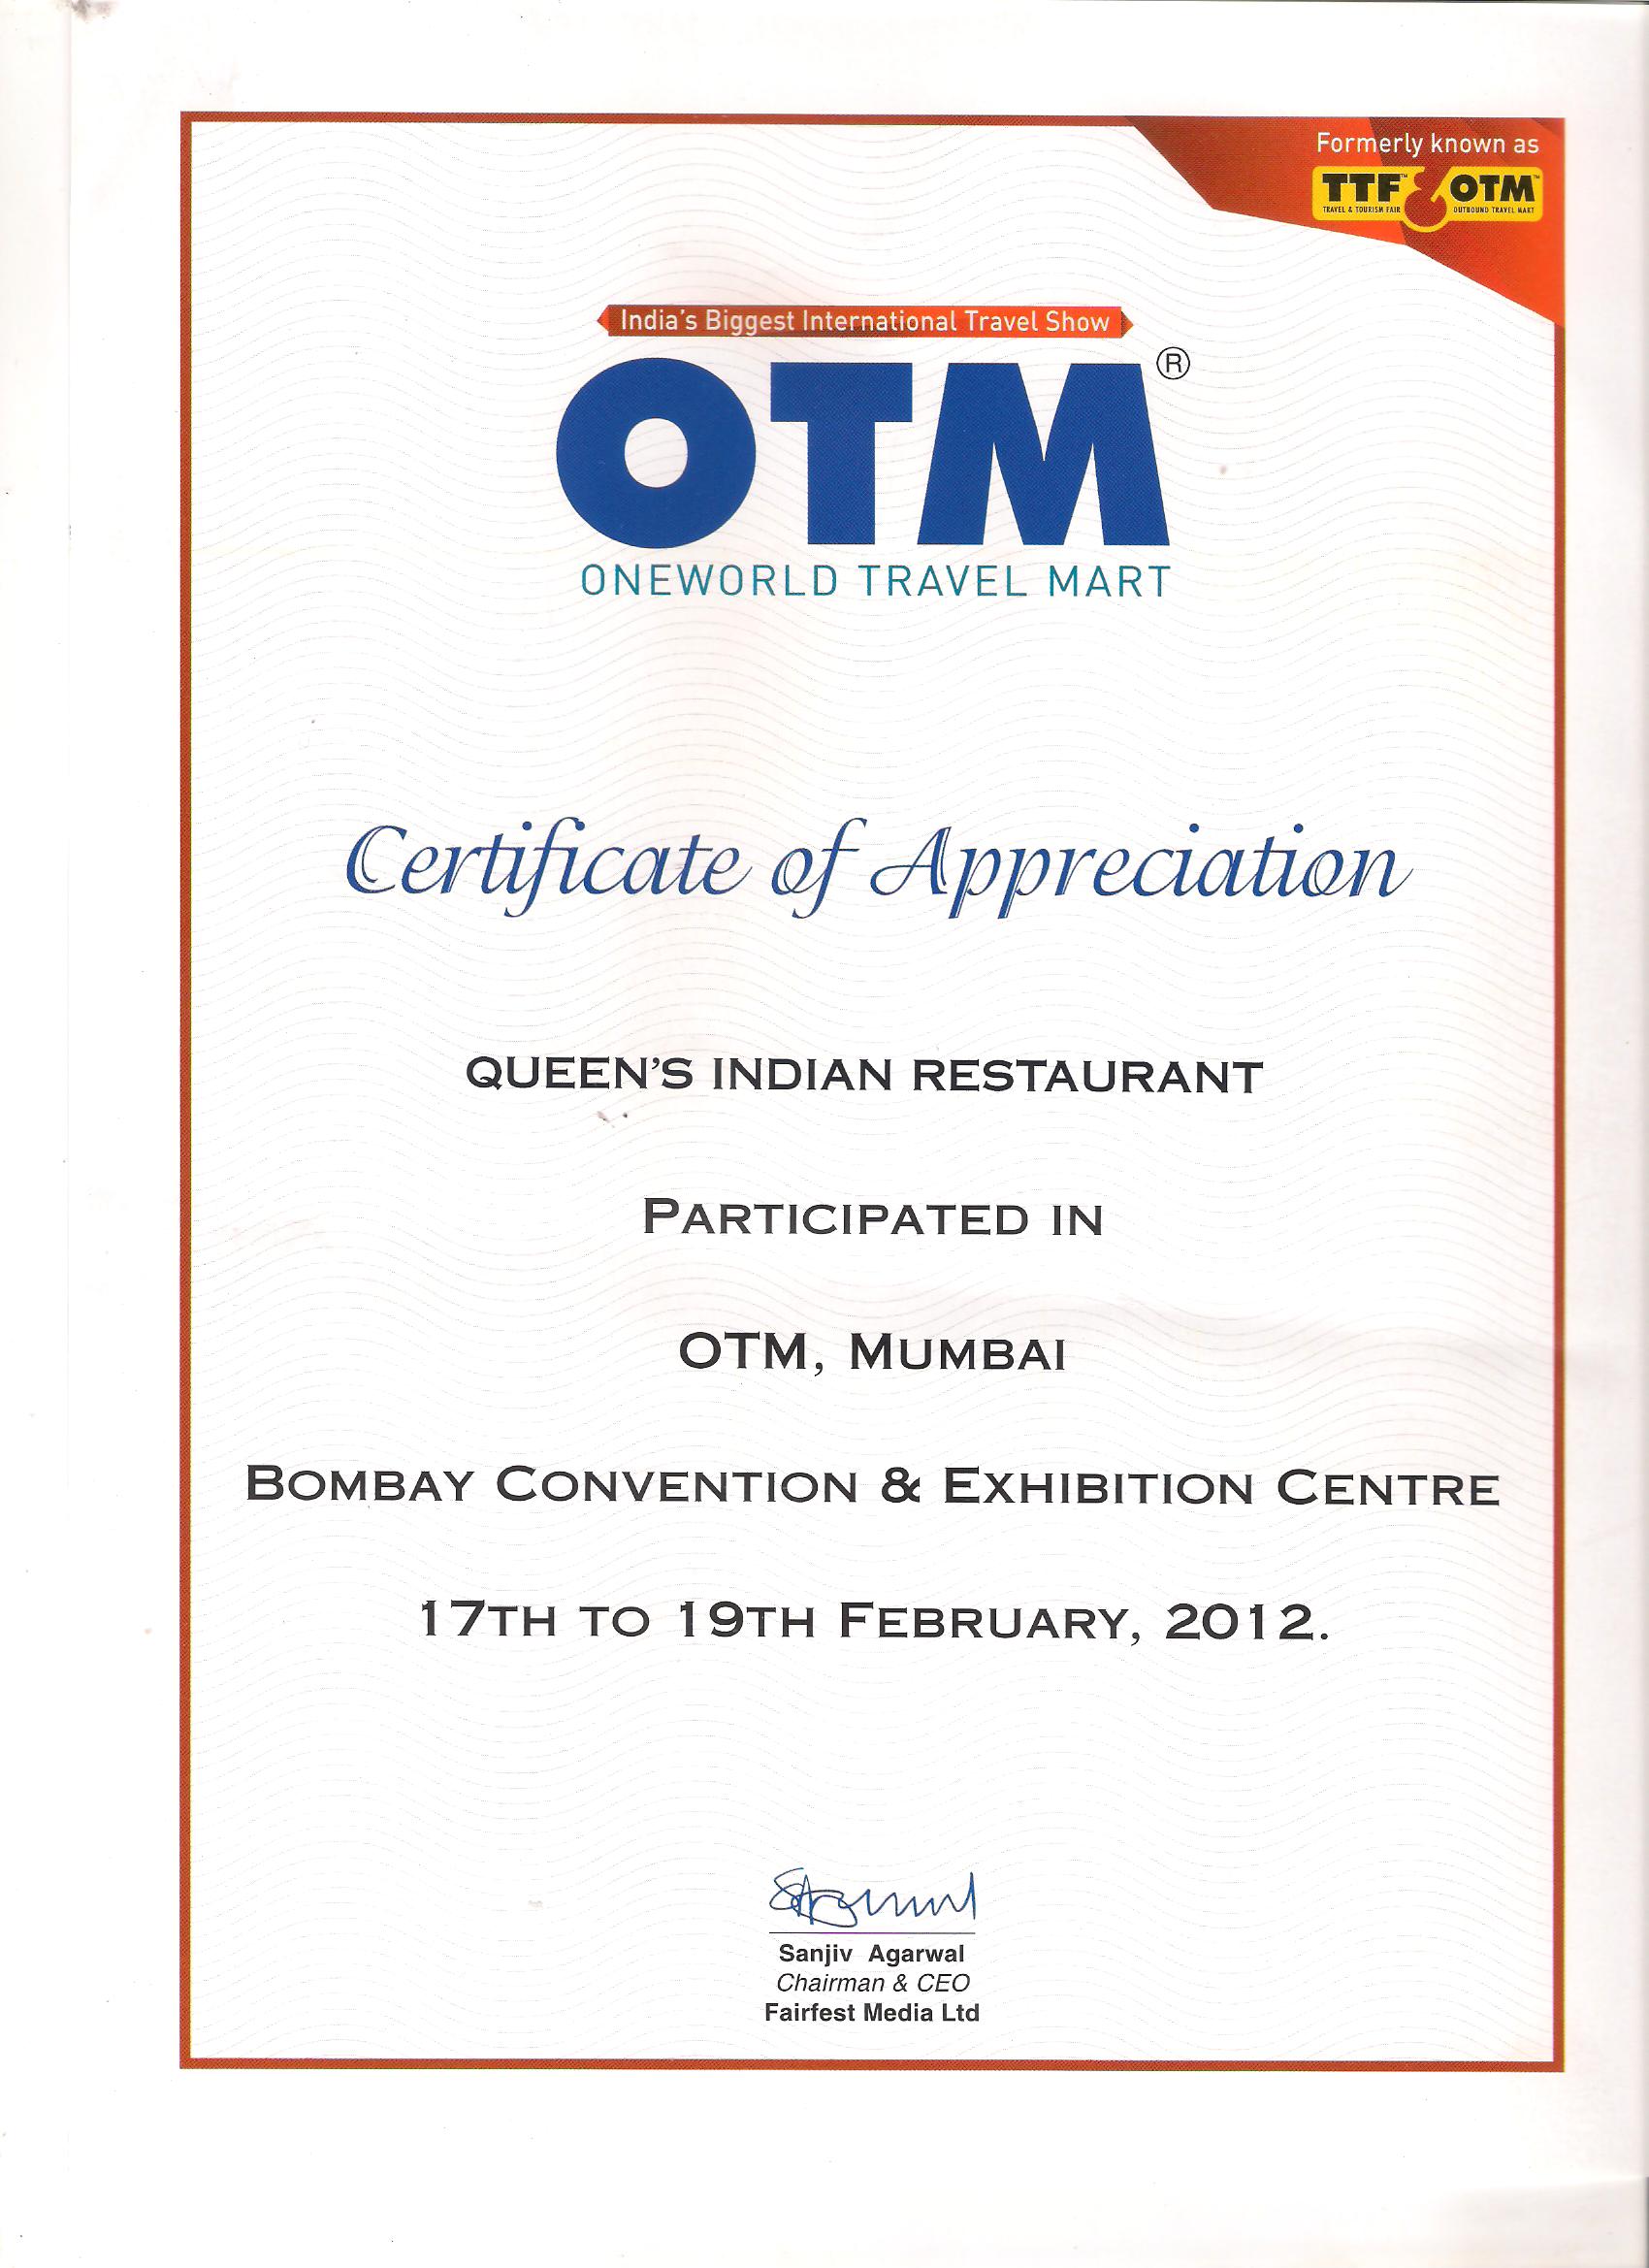 Appreciation for Convention & Exhibition from OTM (One Travel Mart) 2012